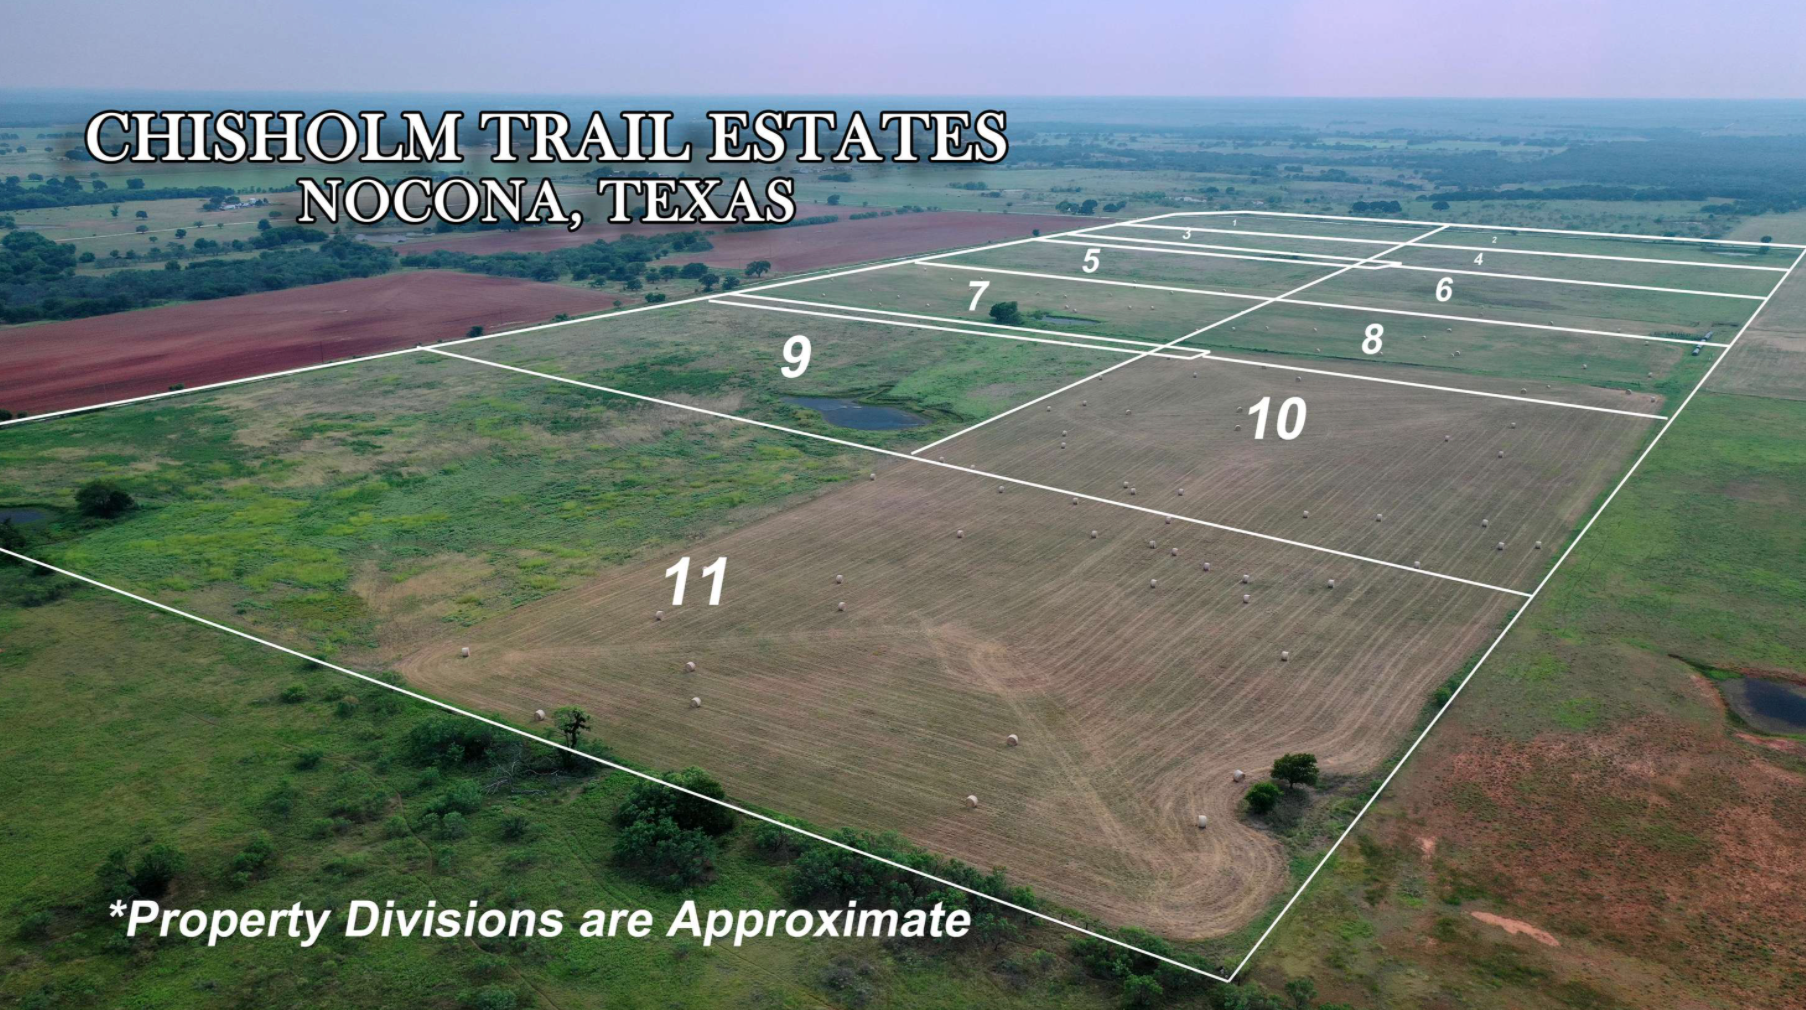 red-river-realty-gary-eldred-montague-county-nocona-texas-acres-development-new-home-builds-tract-landScreen Shot 2021-09-22 at 2.39.50 PM.png